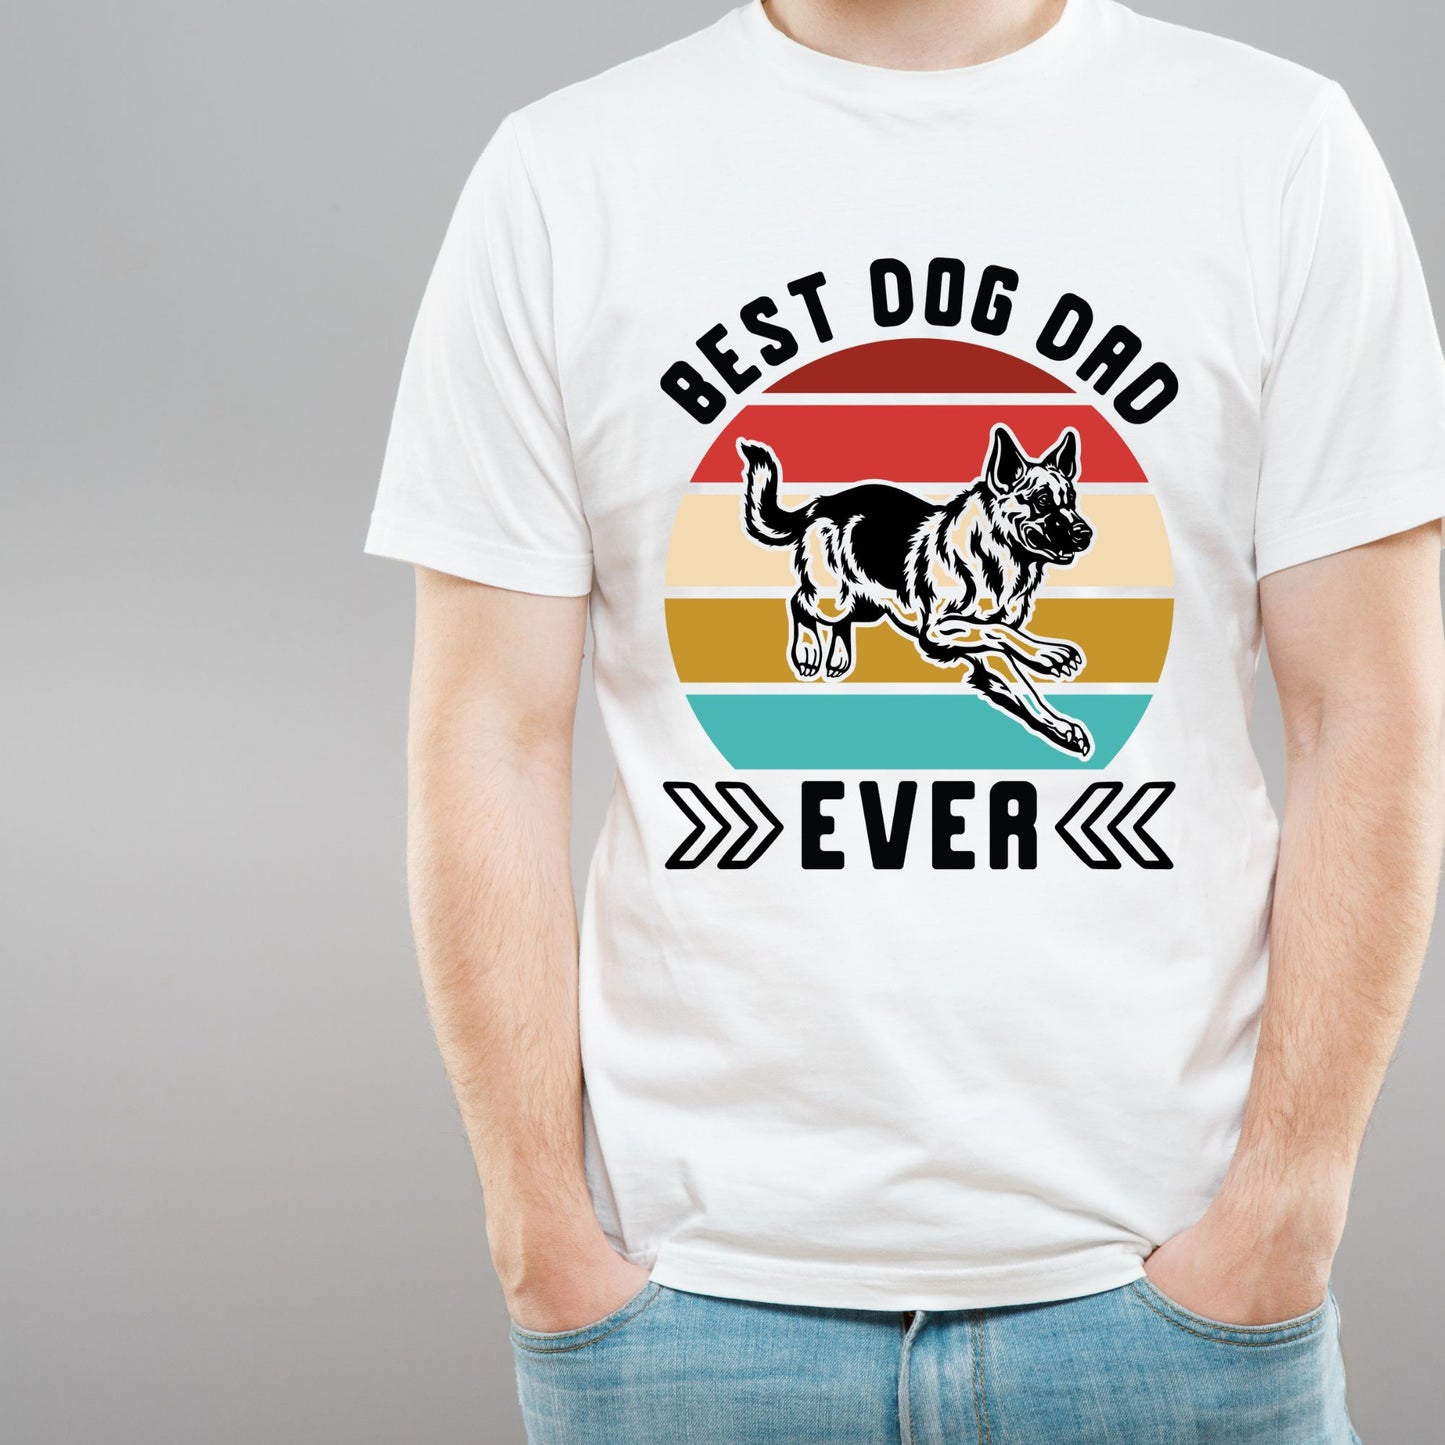 "Best Dog Dad Ever" - Short Sleeved T-Shirt for Father's Day Gift